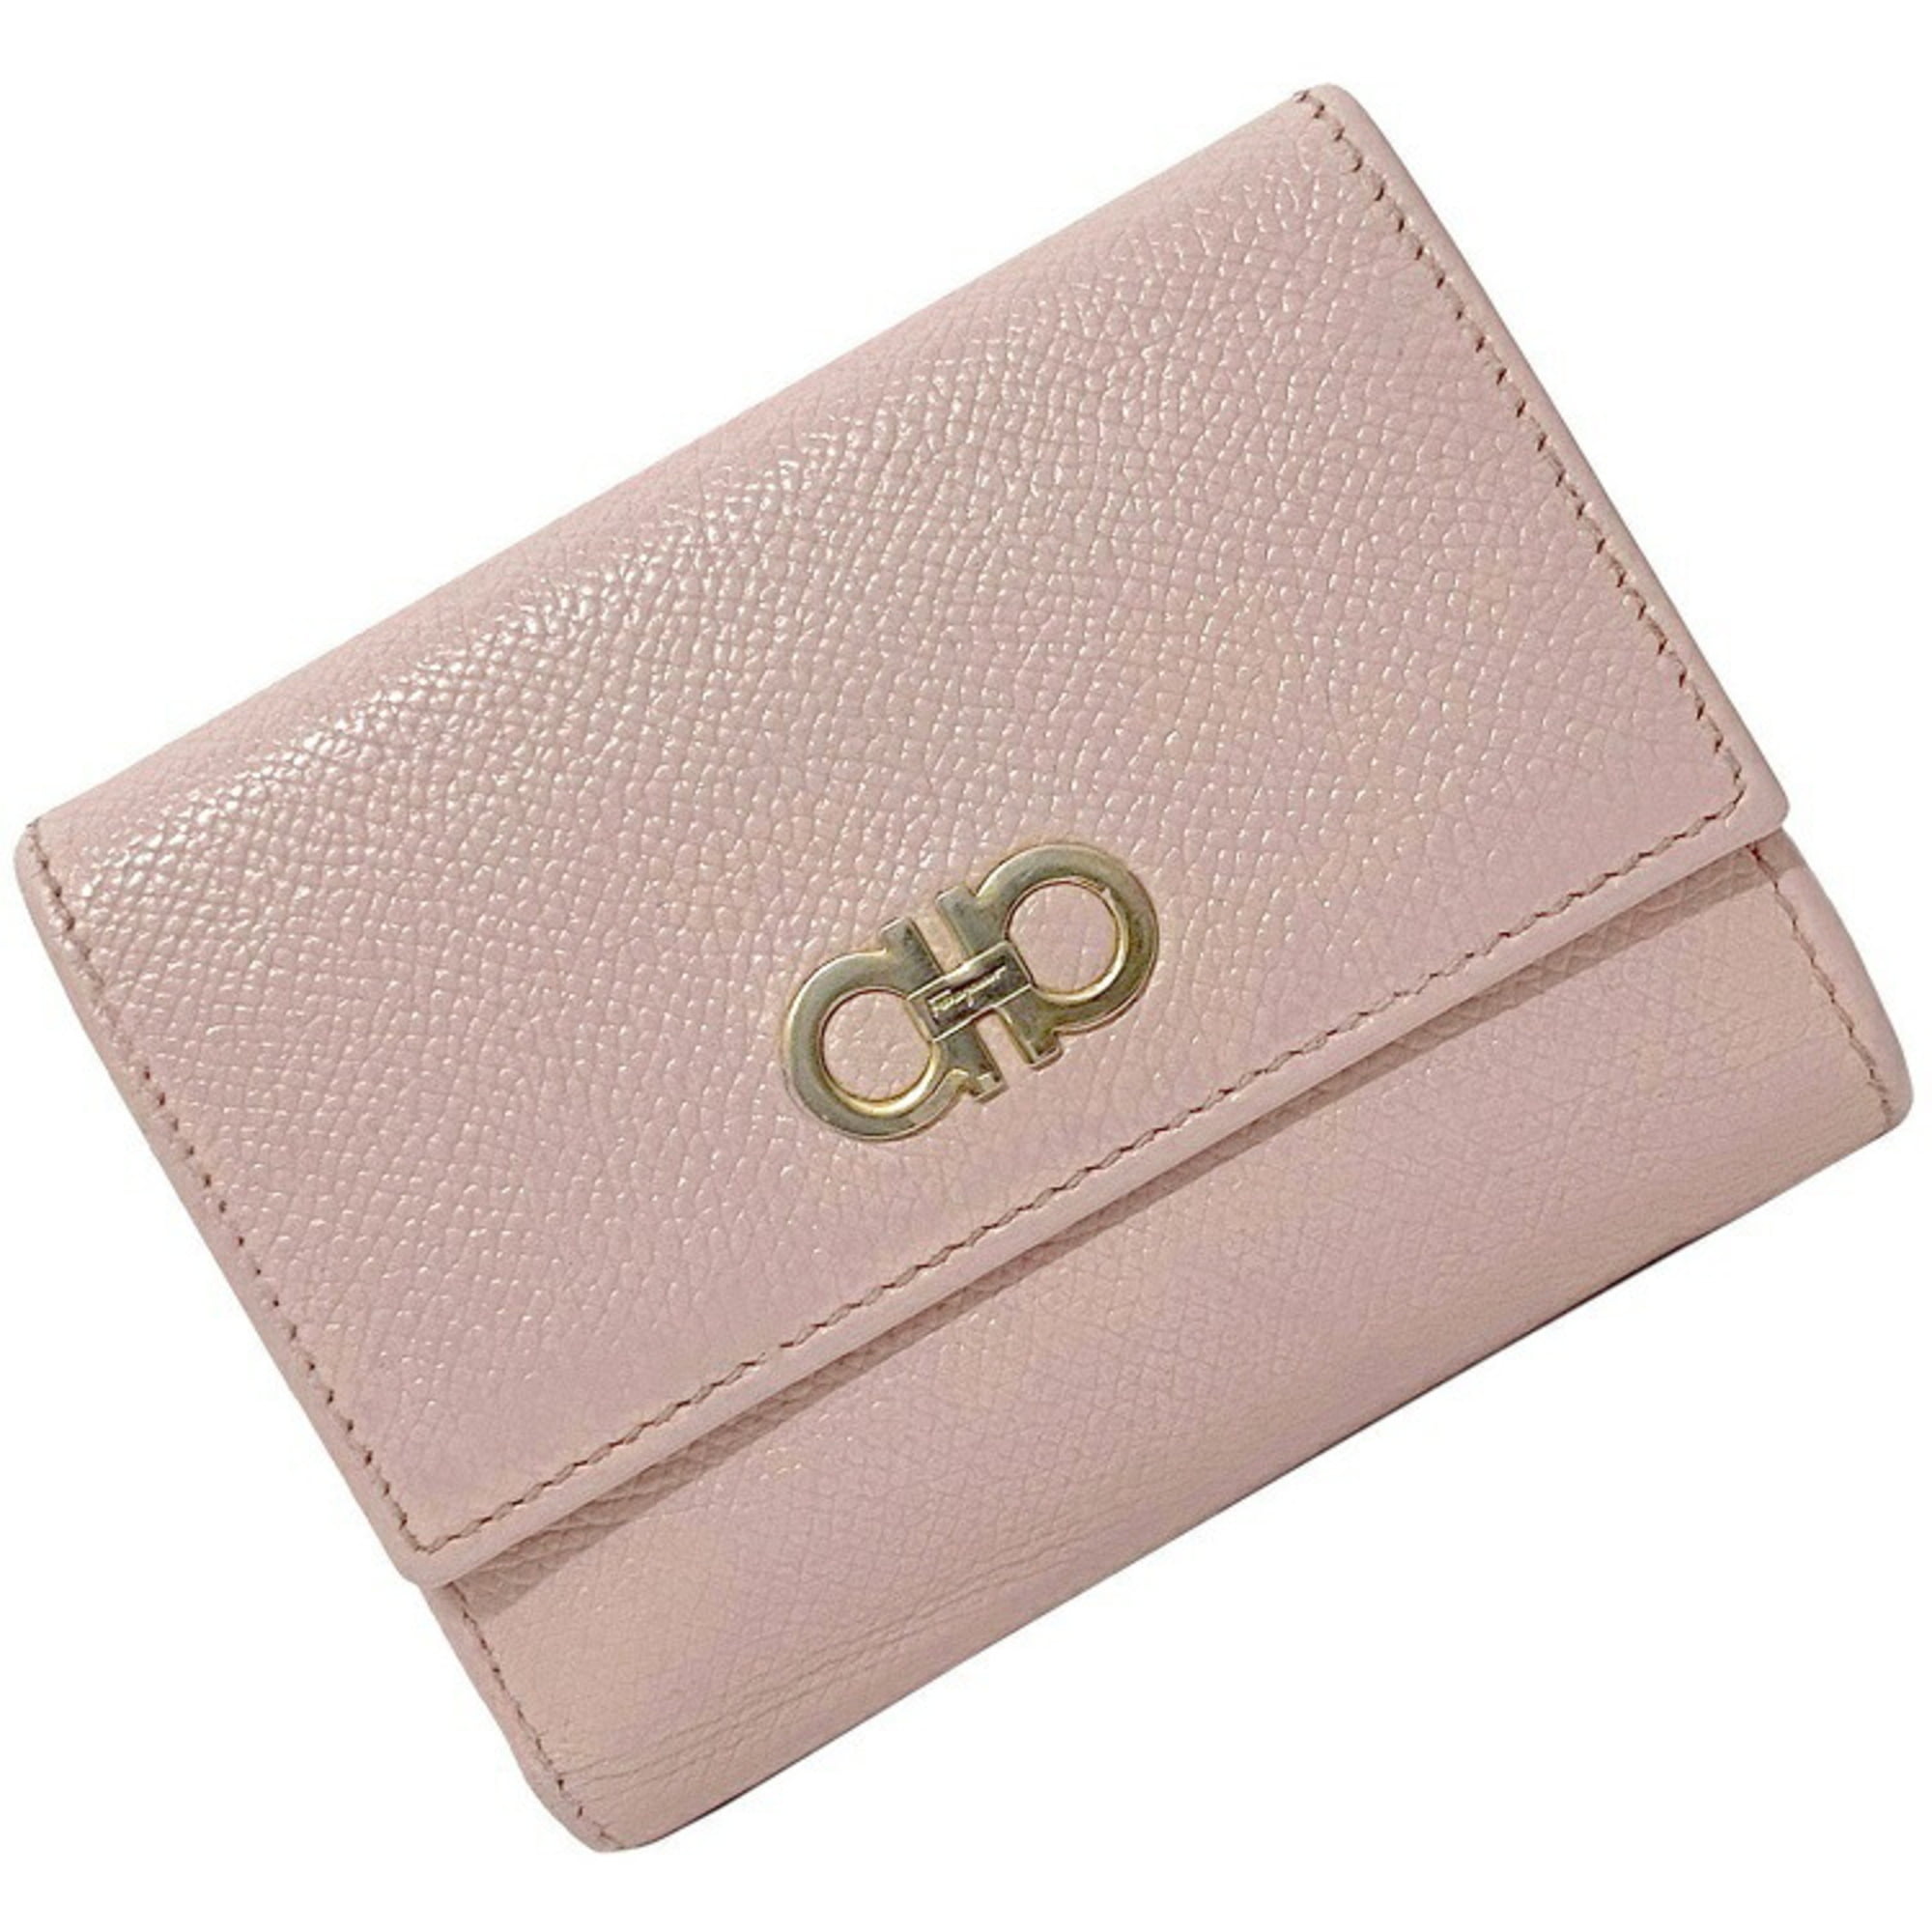 Authenticated Used Salvatore Ferragamo W Folio Wallet Pink Silver Gancini  22 C880 Double Leather Compact with Clear Pocket